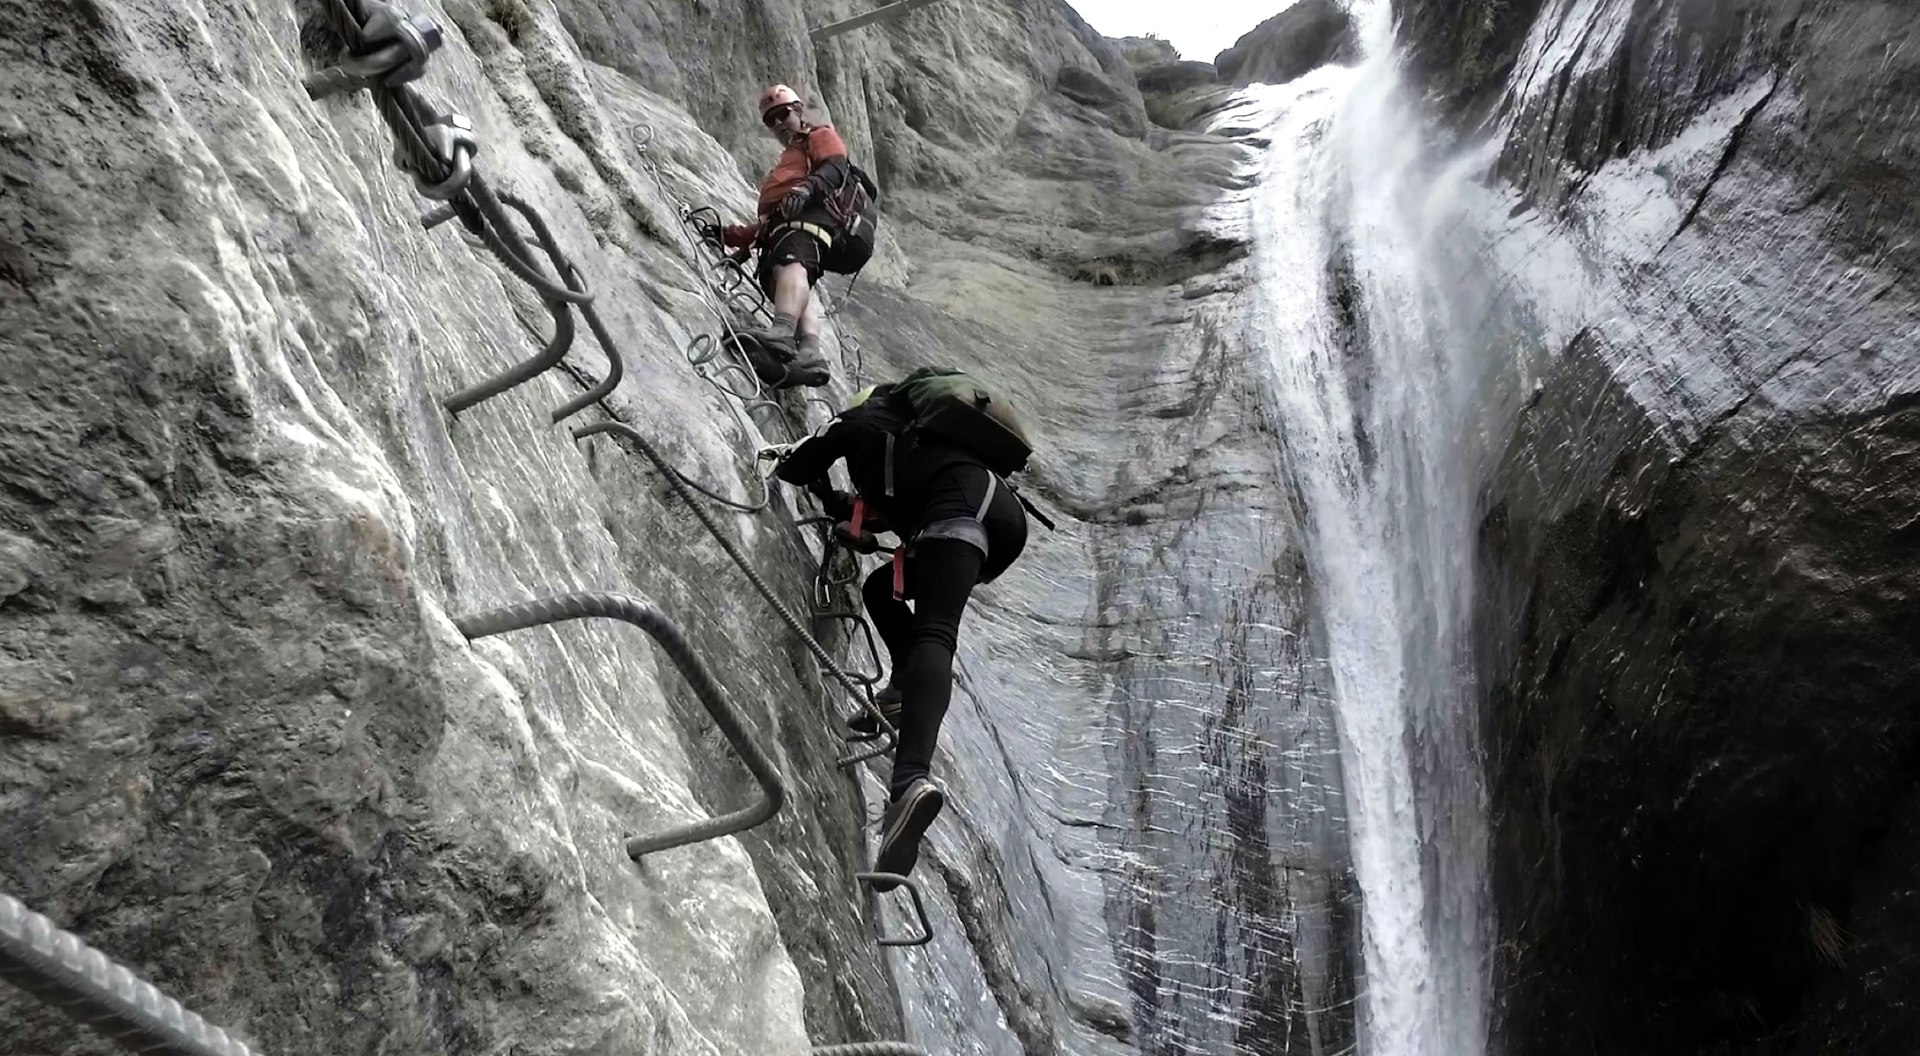 Two people climb up metal staples alongside a waterfall in New Zealand